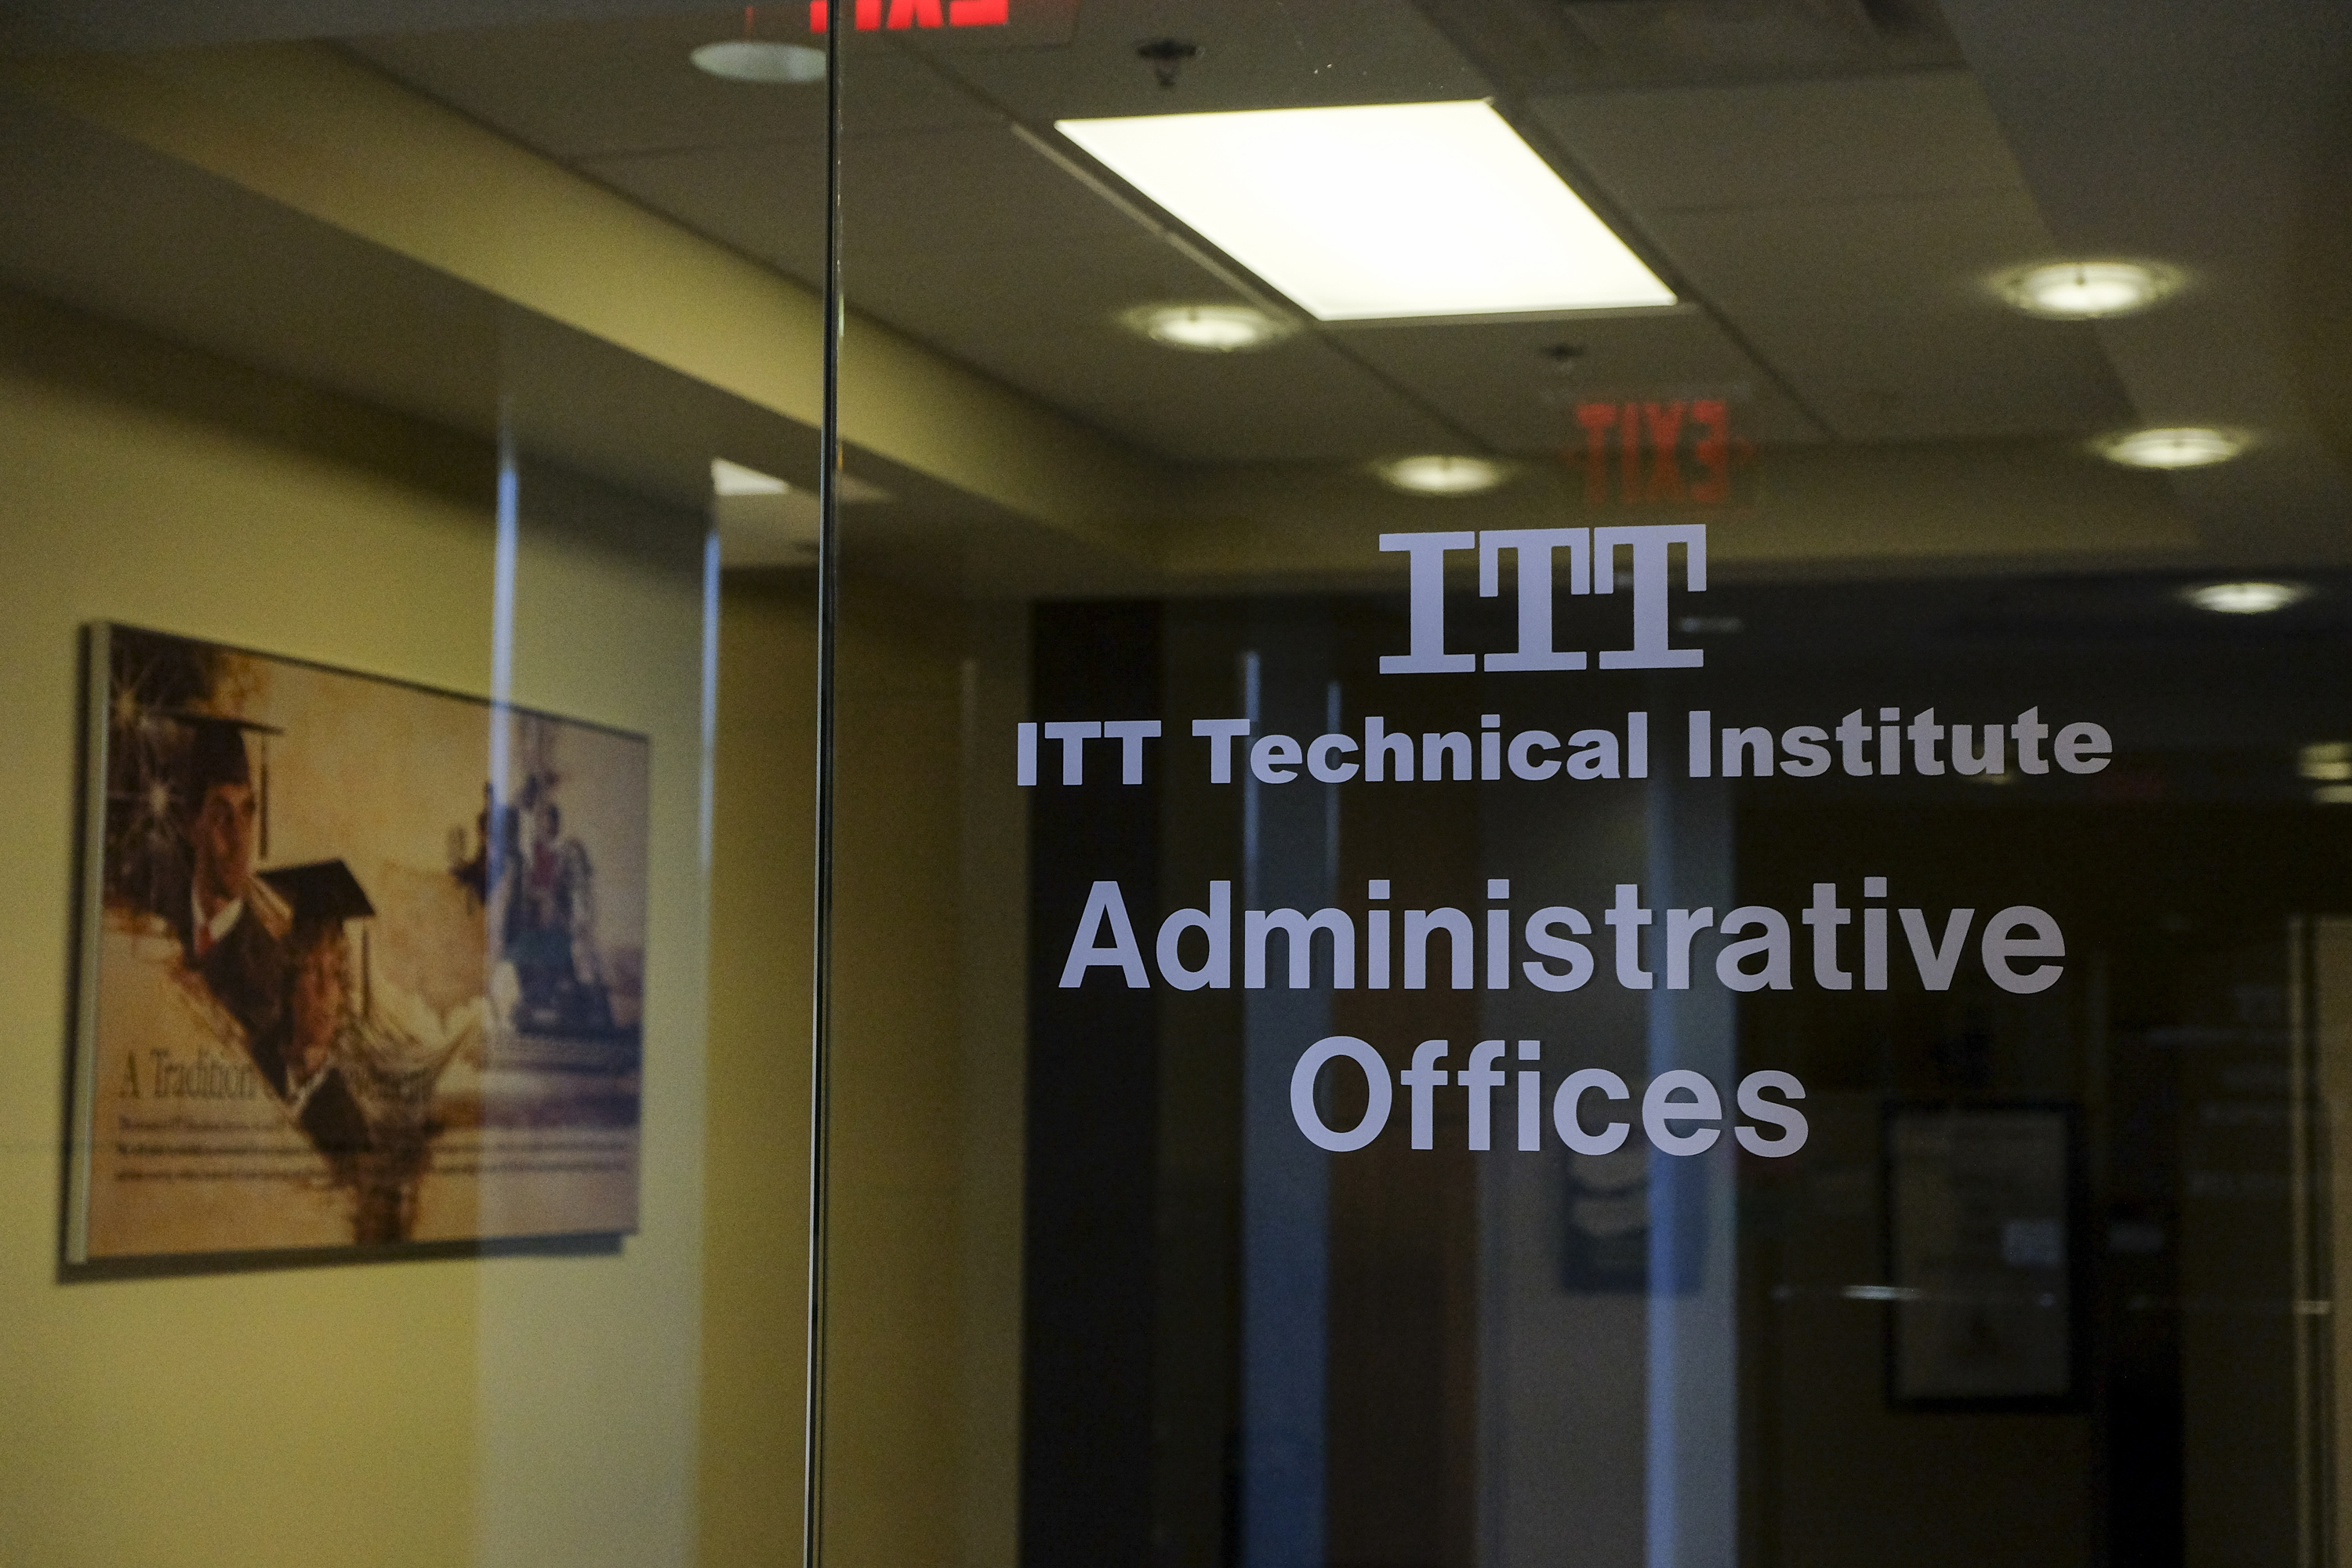 The Chantilly Campus of ITT Technical Institute sits closed and empty on Sept. 6, 2016. (The Washington Post/Getty Images)